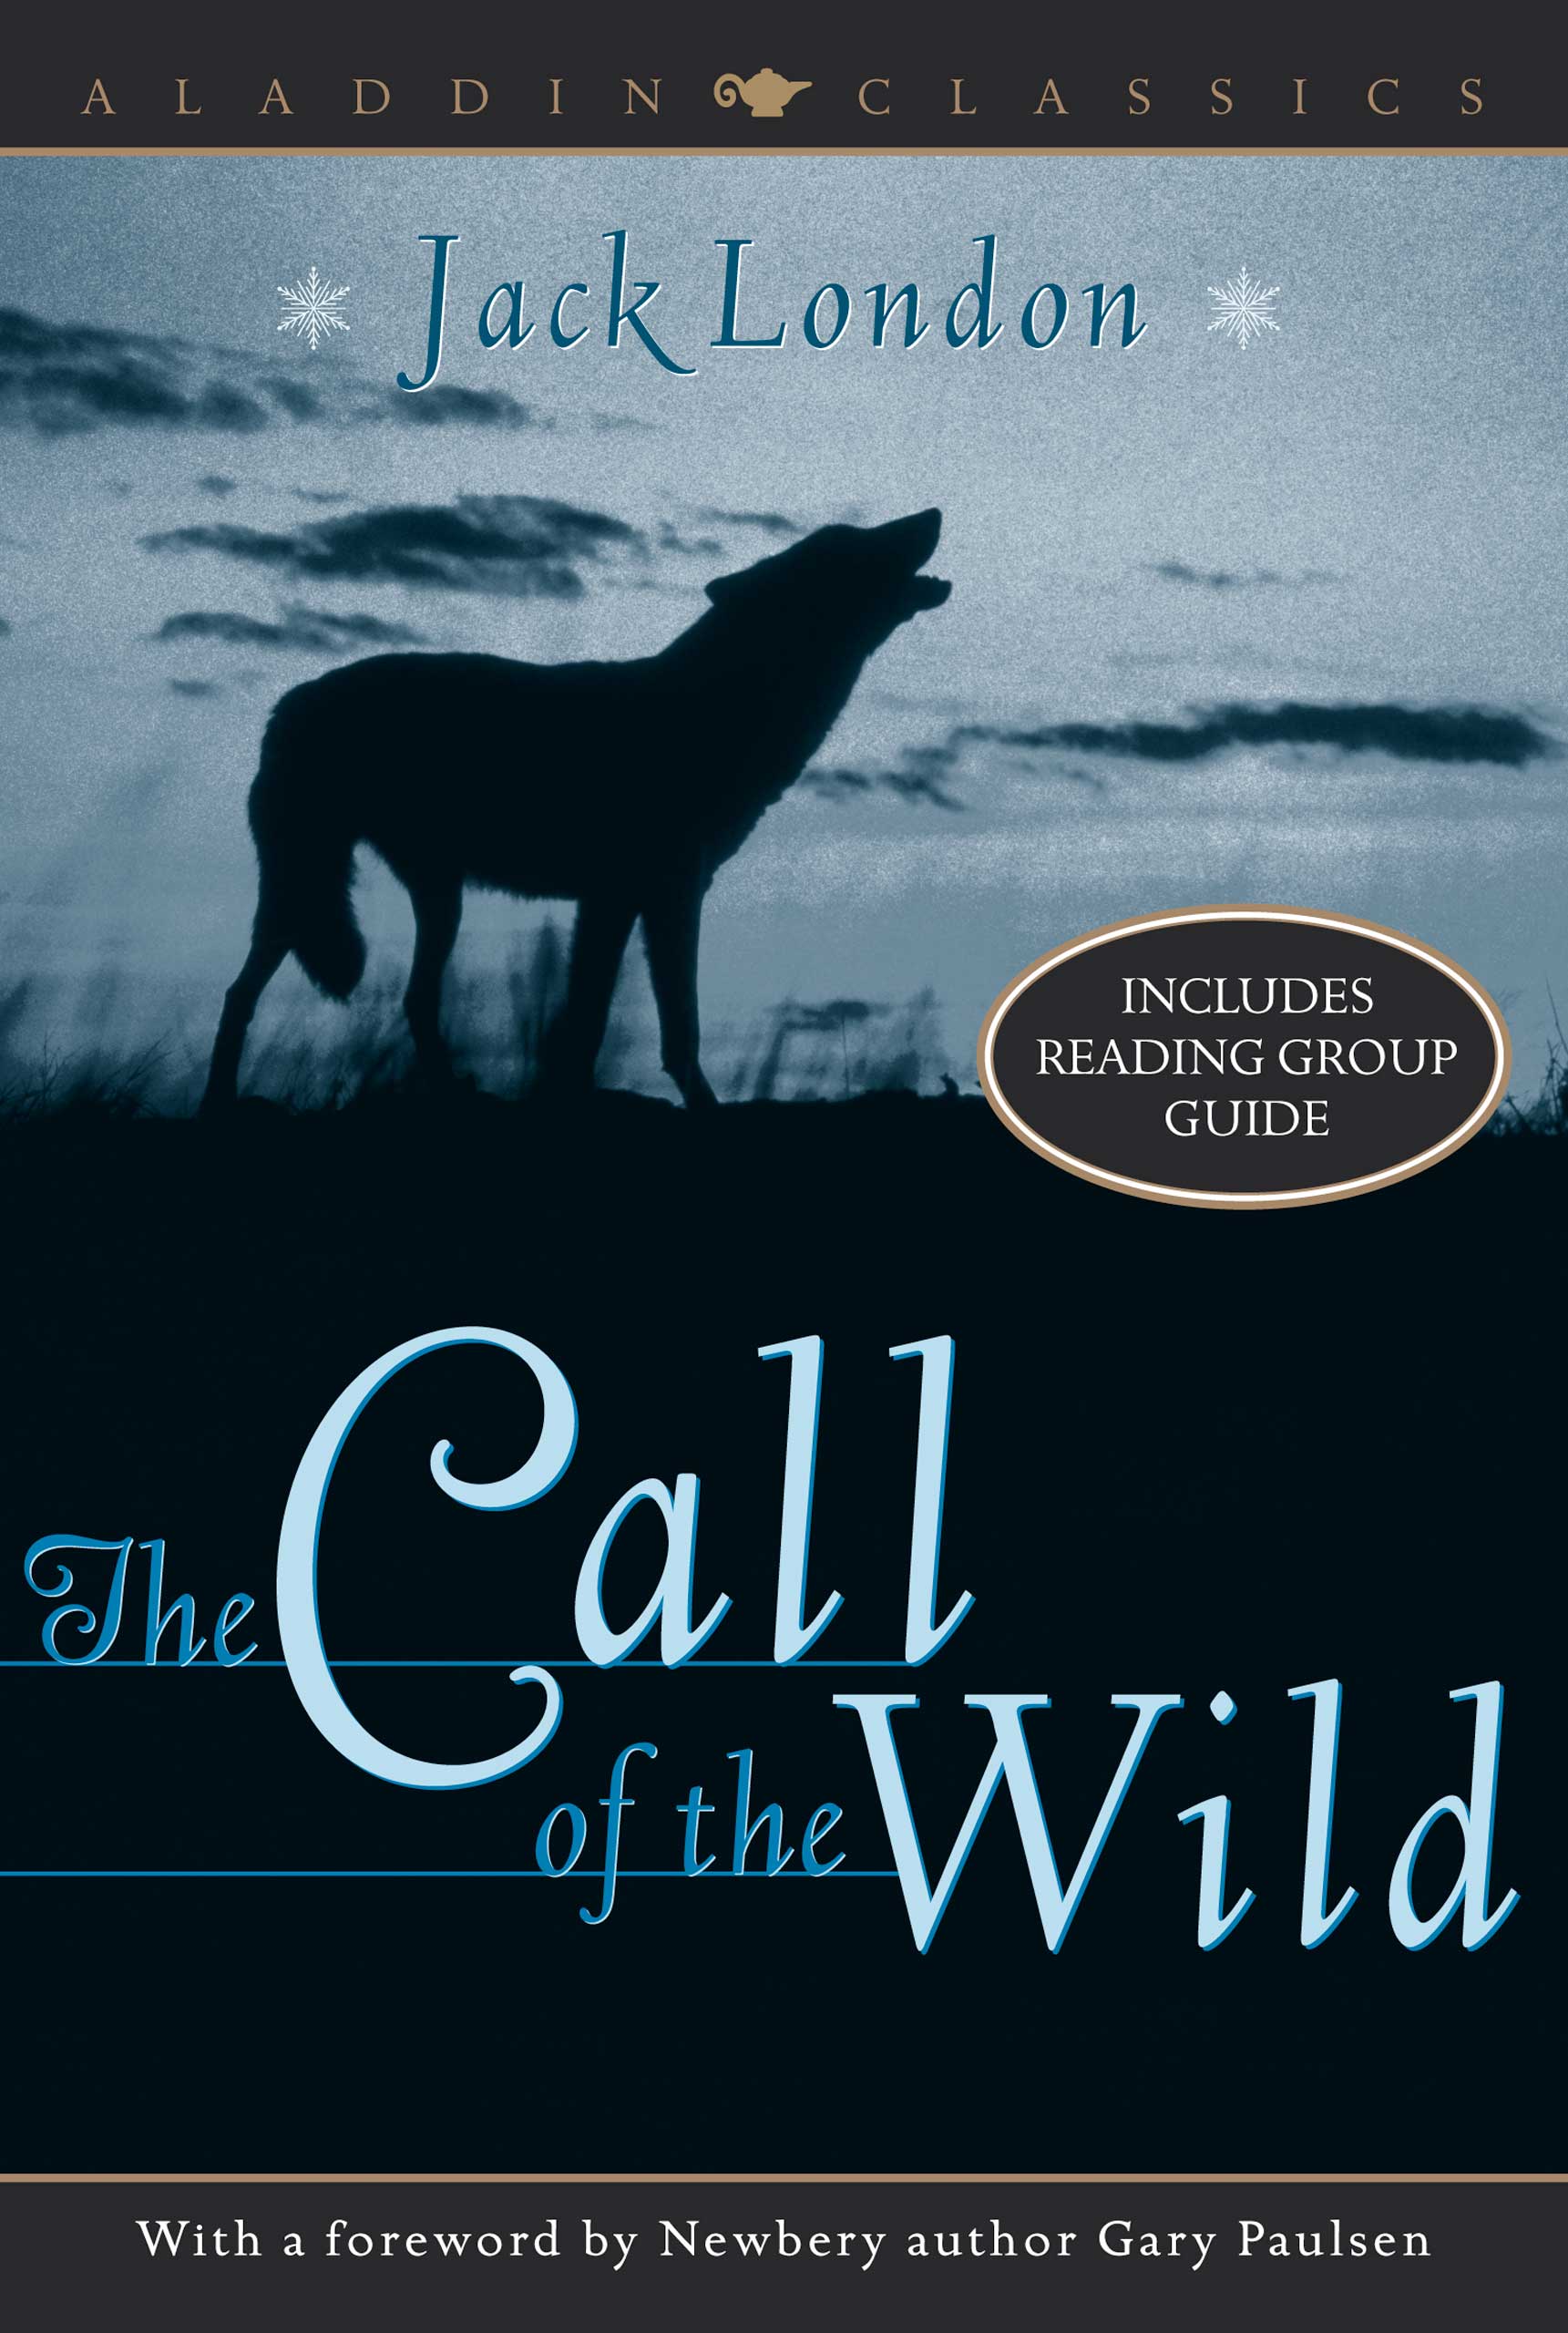 The Call of the Wild, by Jack London.
                              
                              
                              
                              Buck, a domesticated dog in California, is stolen and forced to become a sled dog in Alaska, where he ultimately must decide whether to remain with humans or enter the wilderness.
                              
                              
                              
                              Buy now: The Call of the Wild